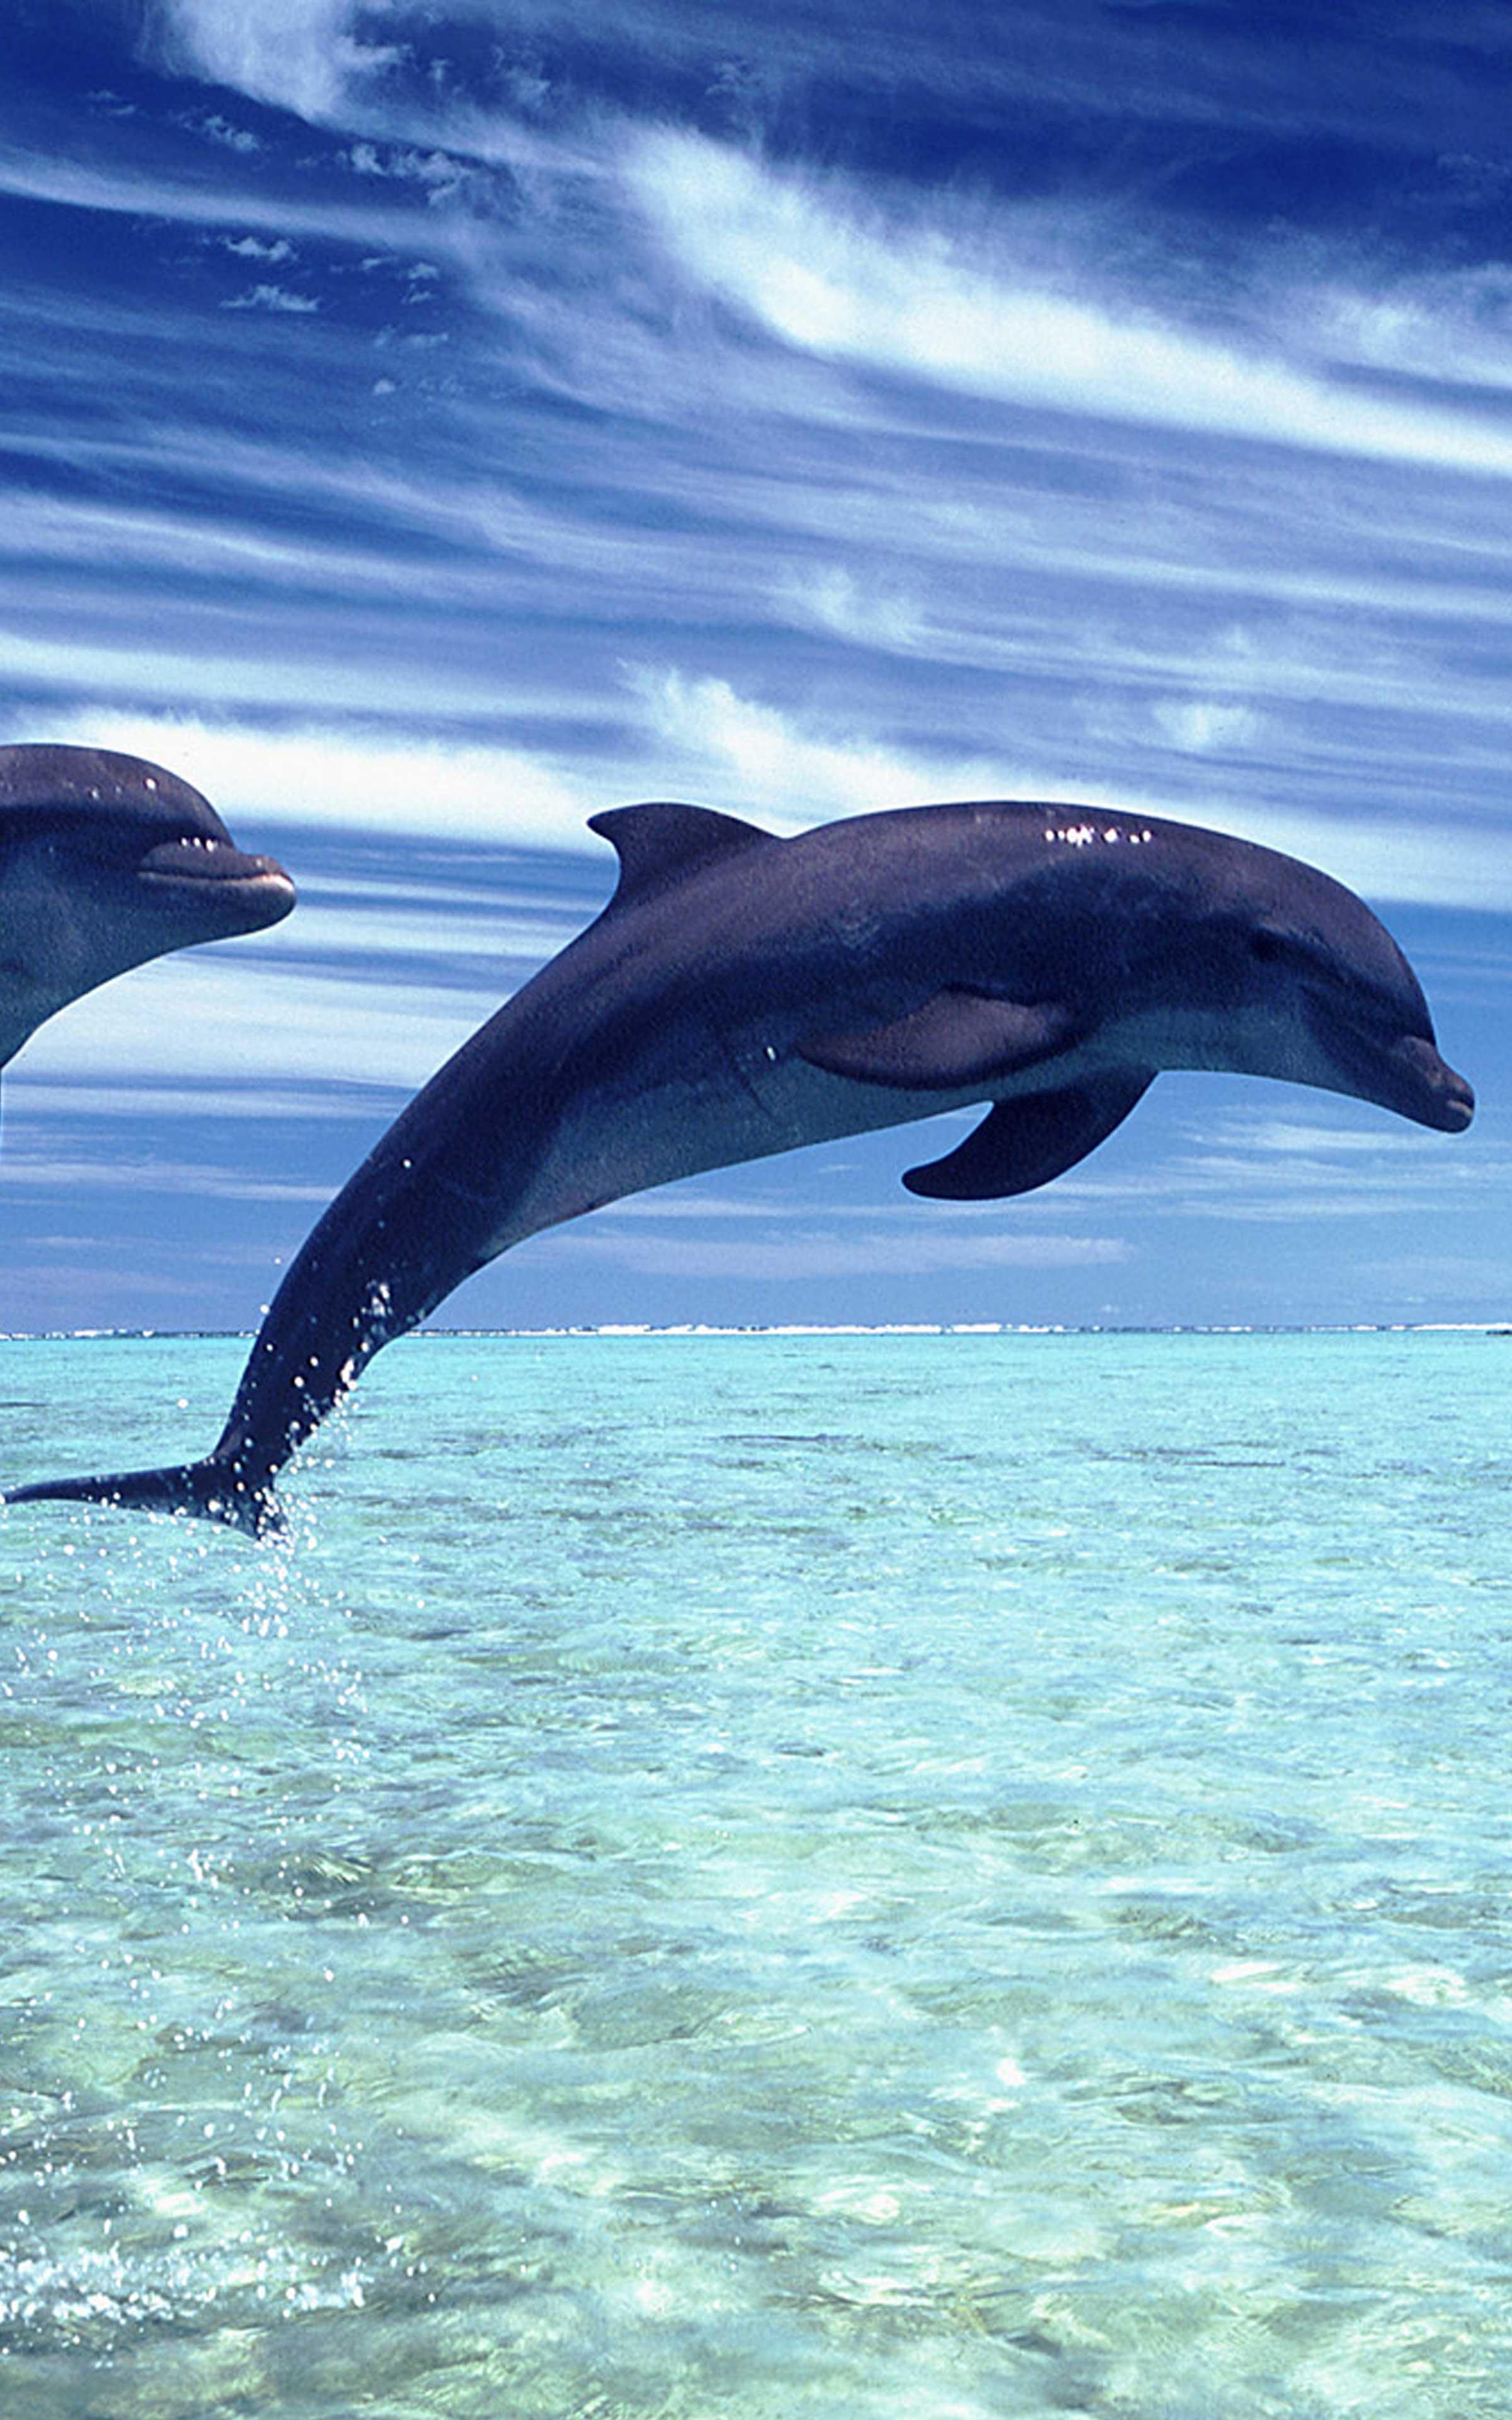 Dolphin Wallpaper - Best Cool Dolphin Wallpapers para Android - APK